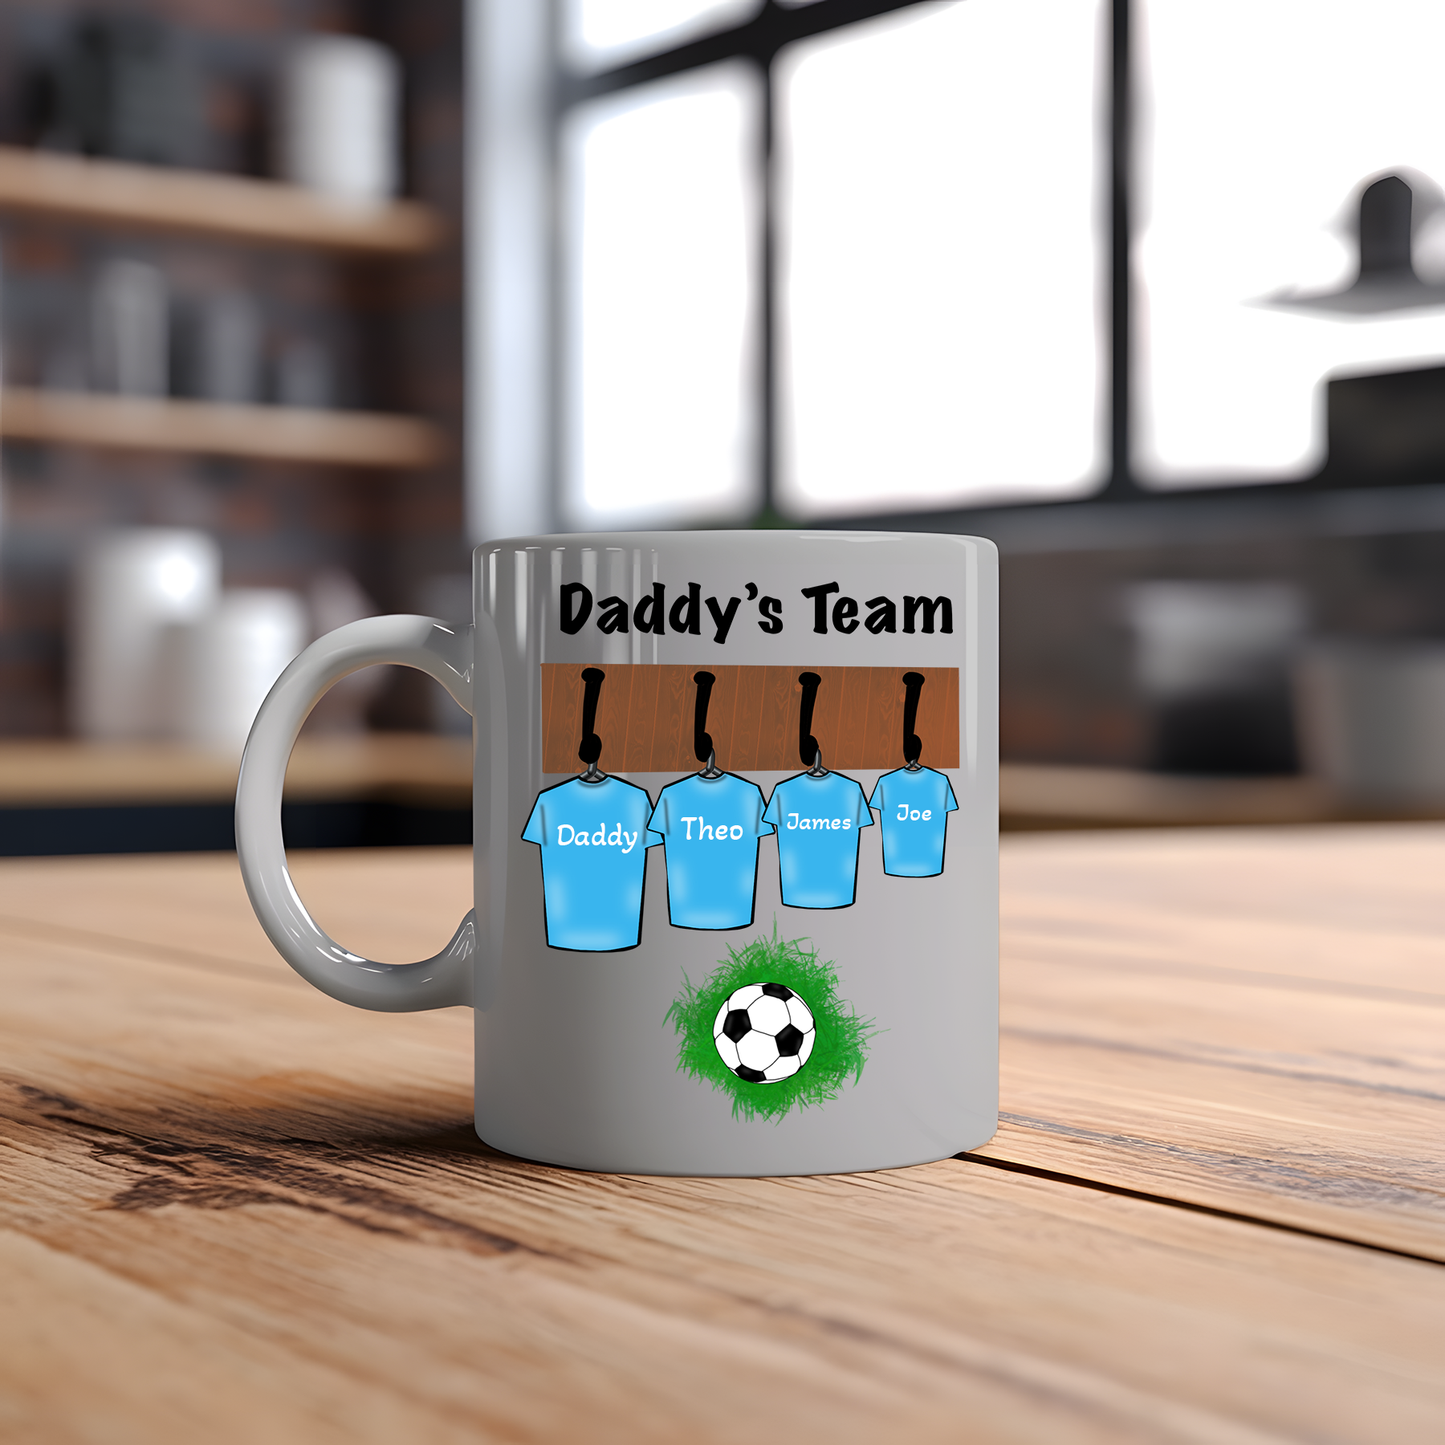 "Daddys Team" Personalised Family Mug for Dad